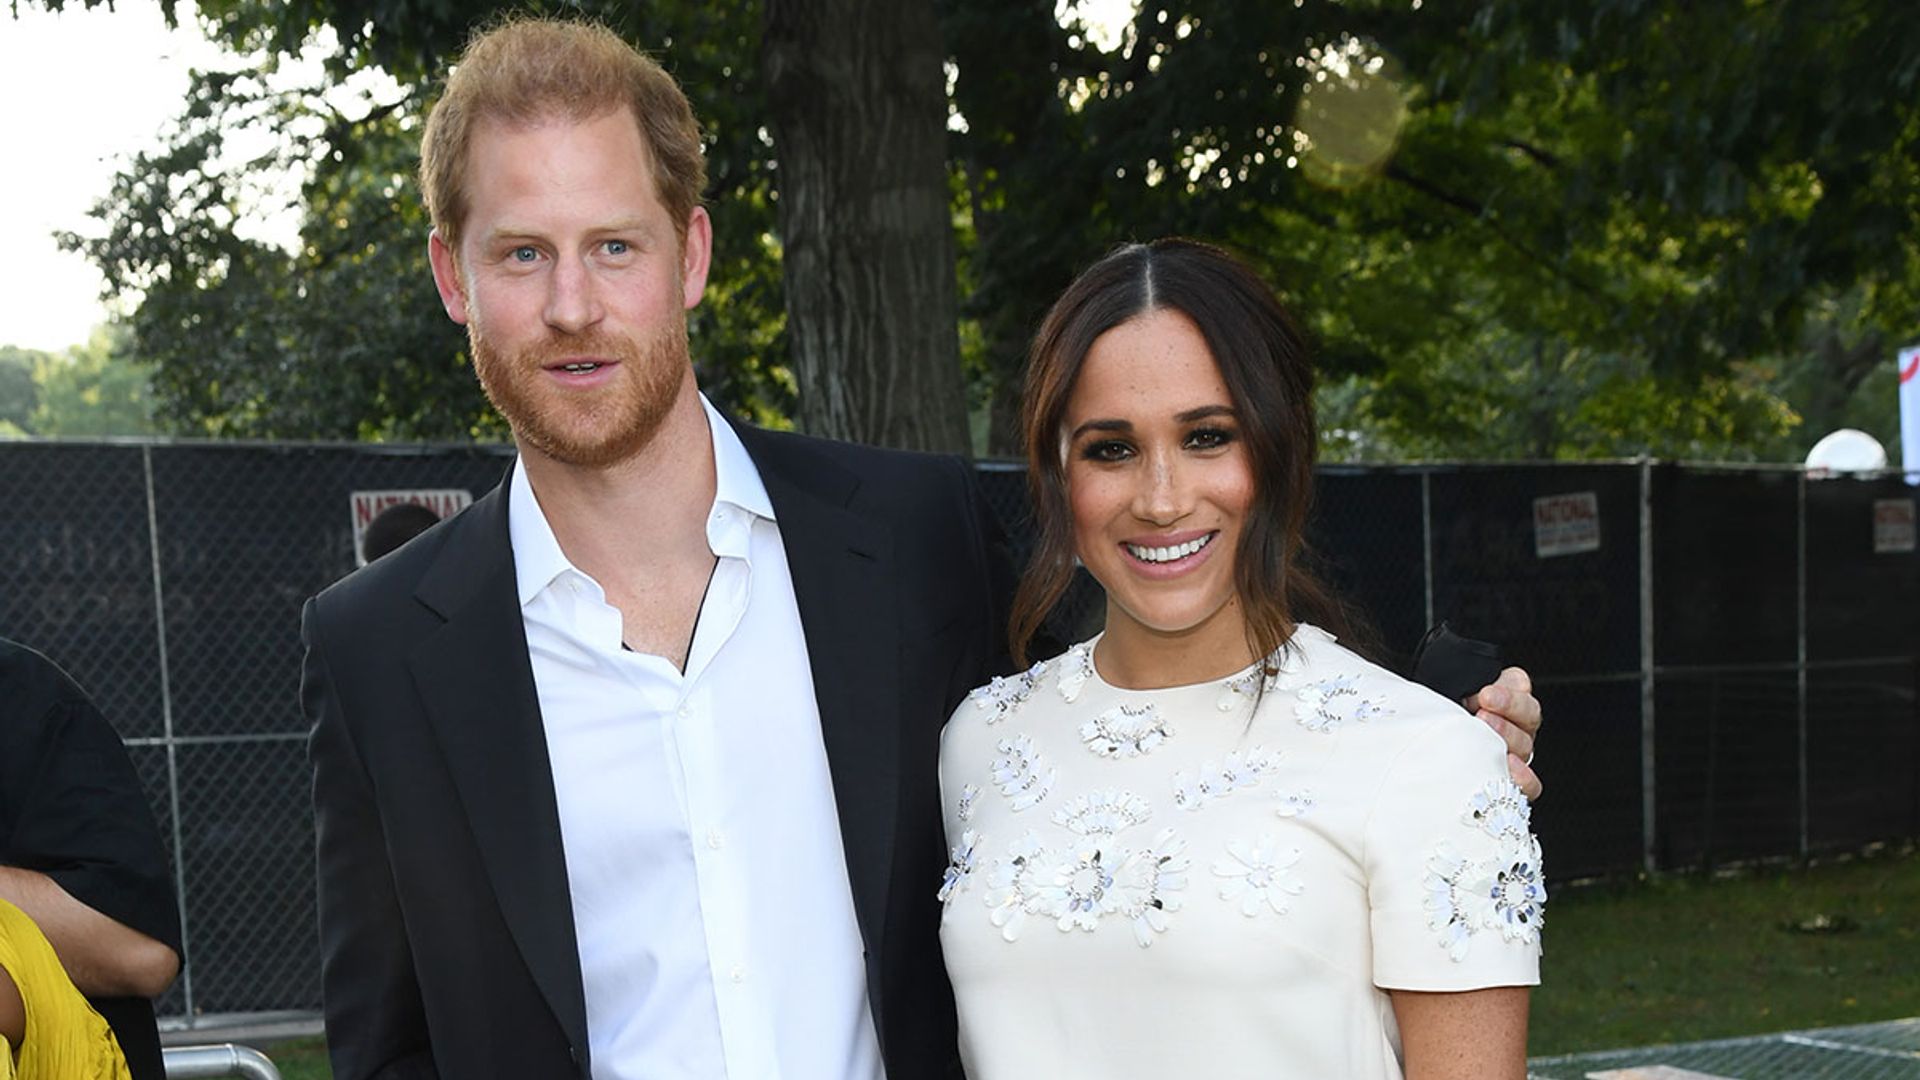 Prince Harry and Meghan Markle's surprising new venture revealed